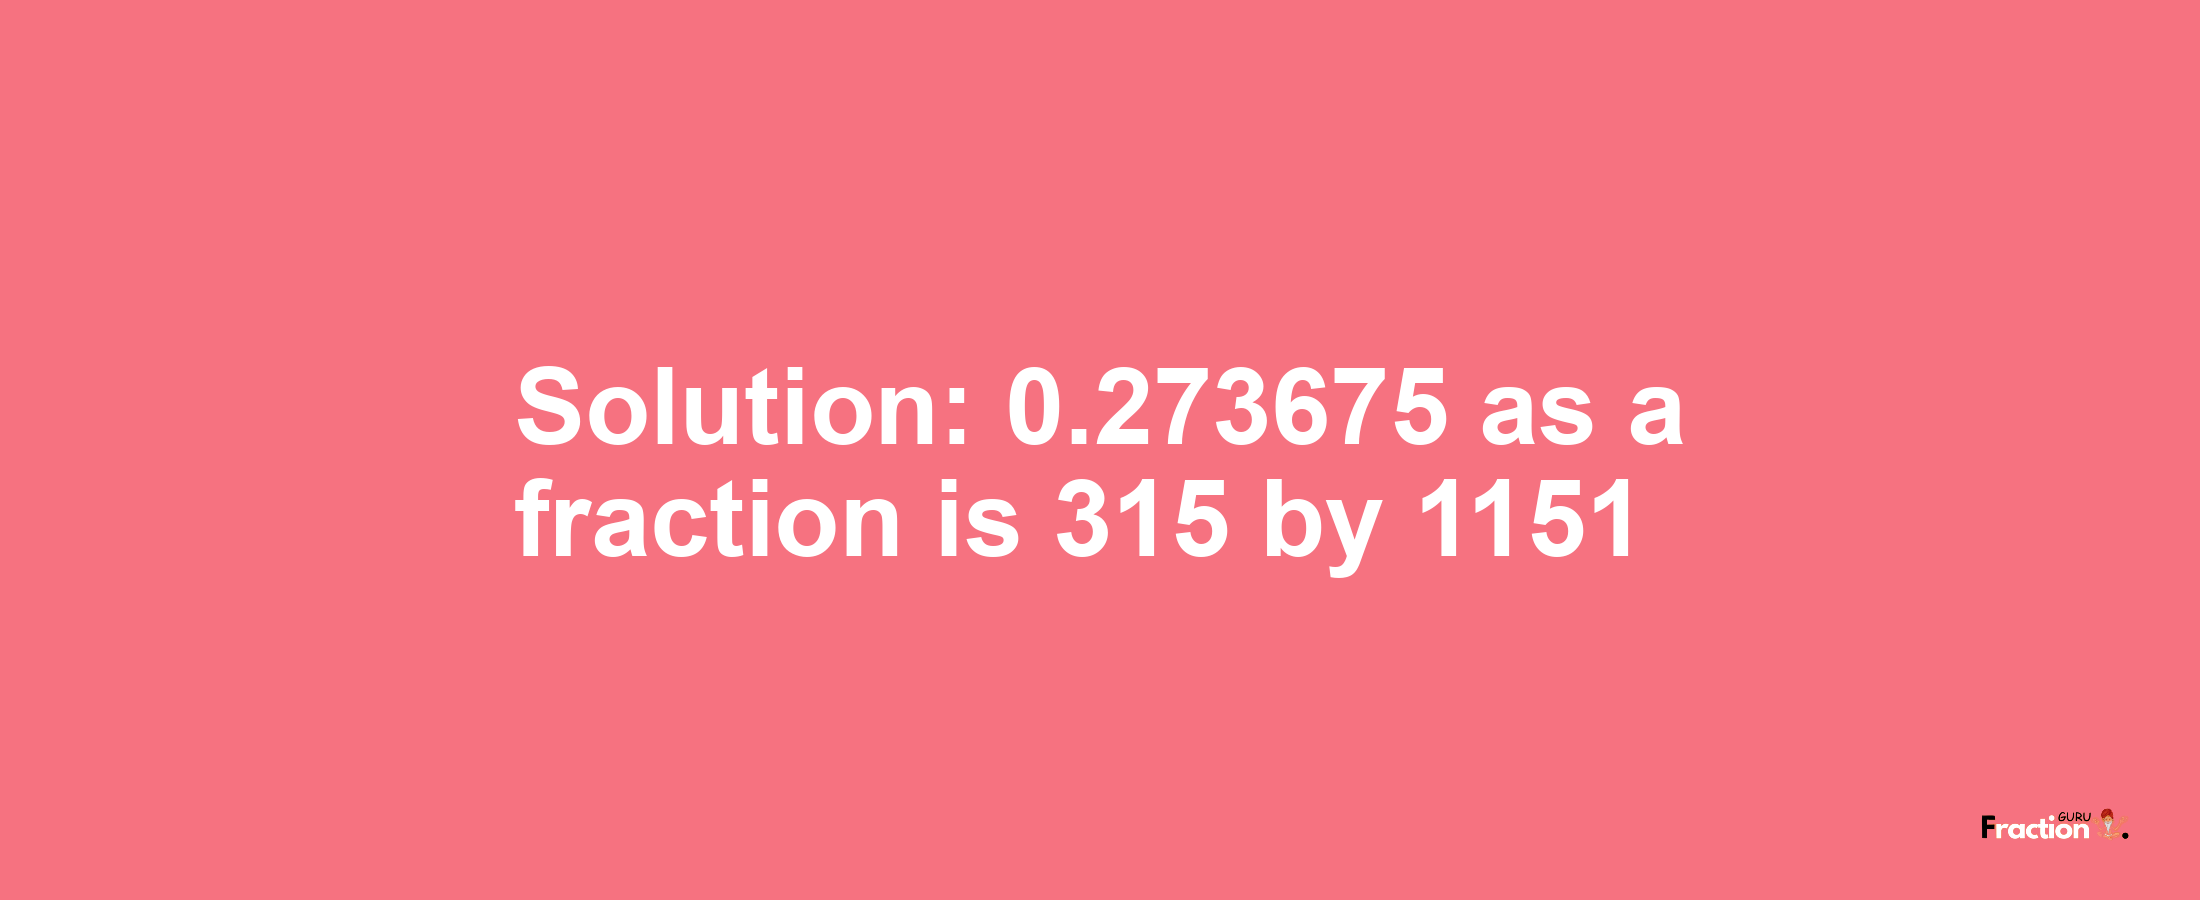 Solution:0.273675 as a fraction is 315/1151